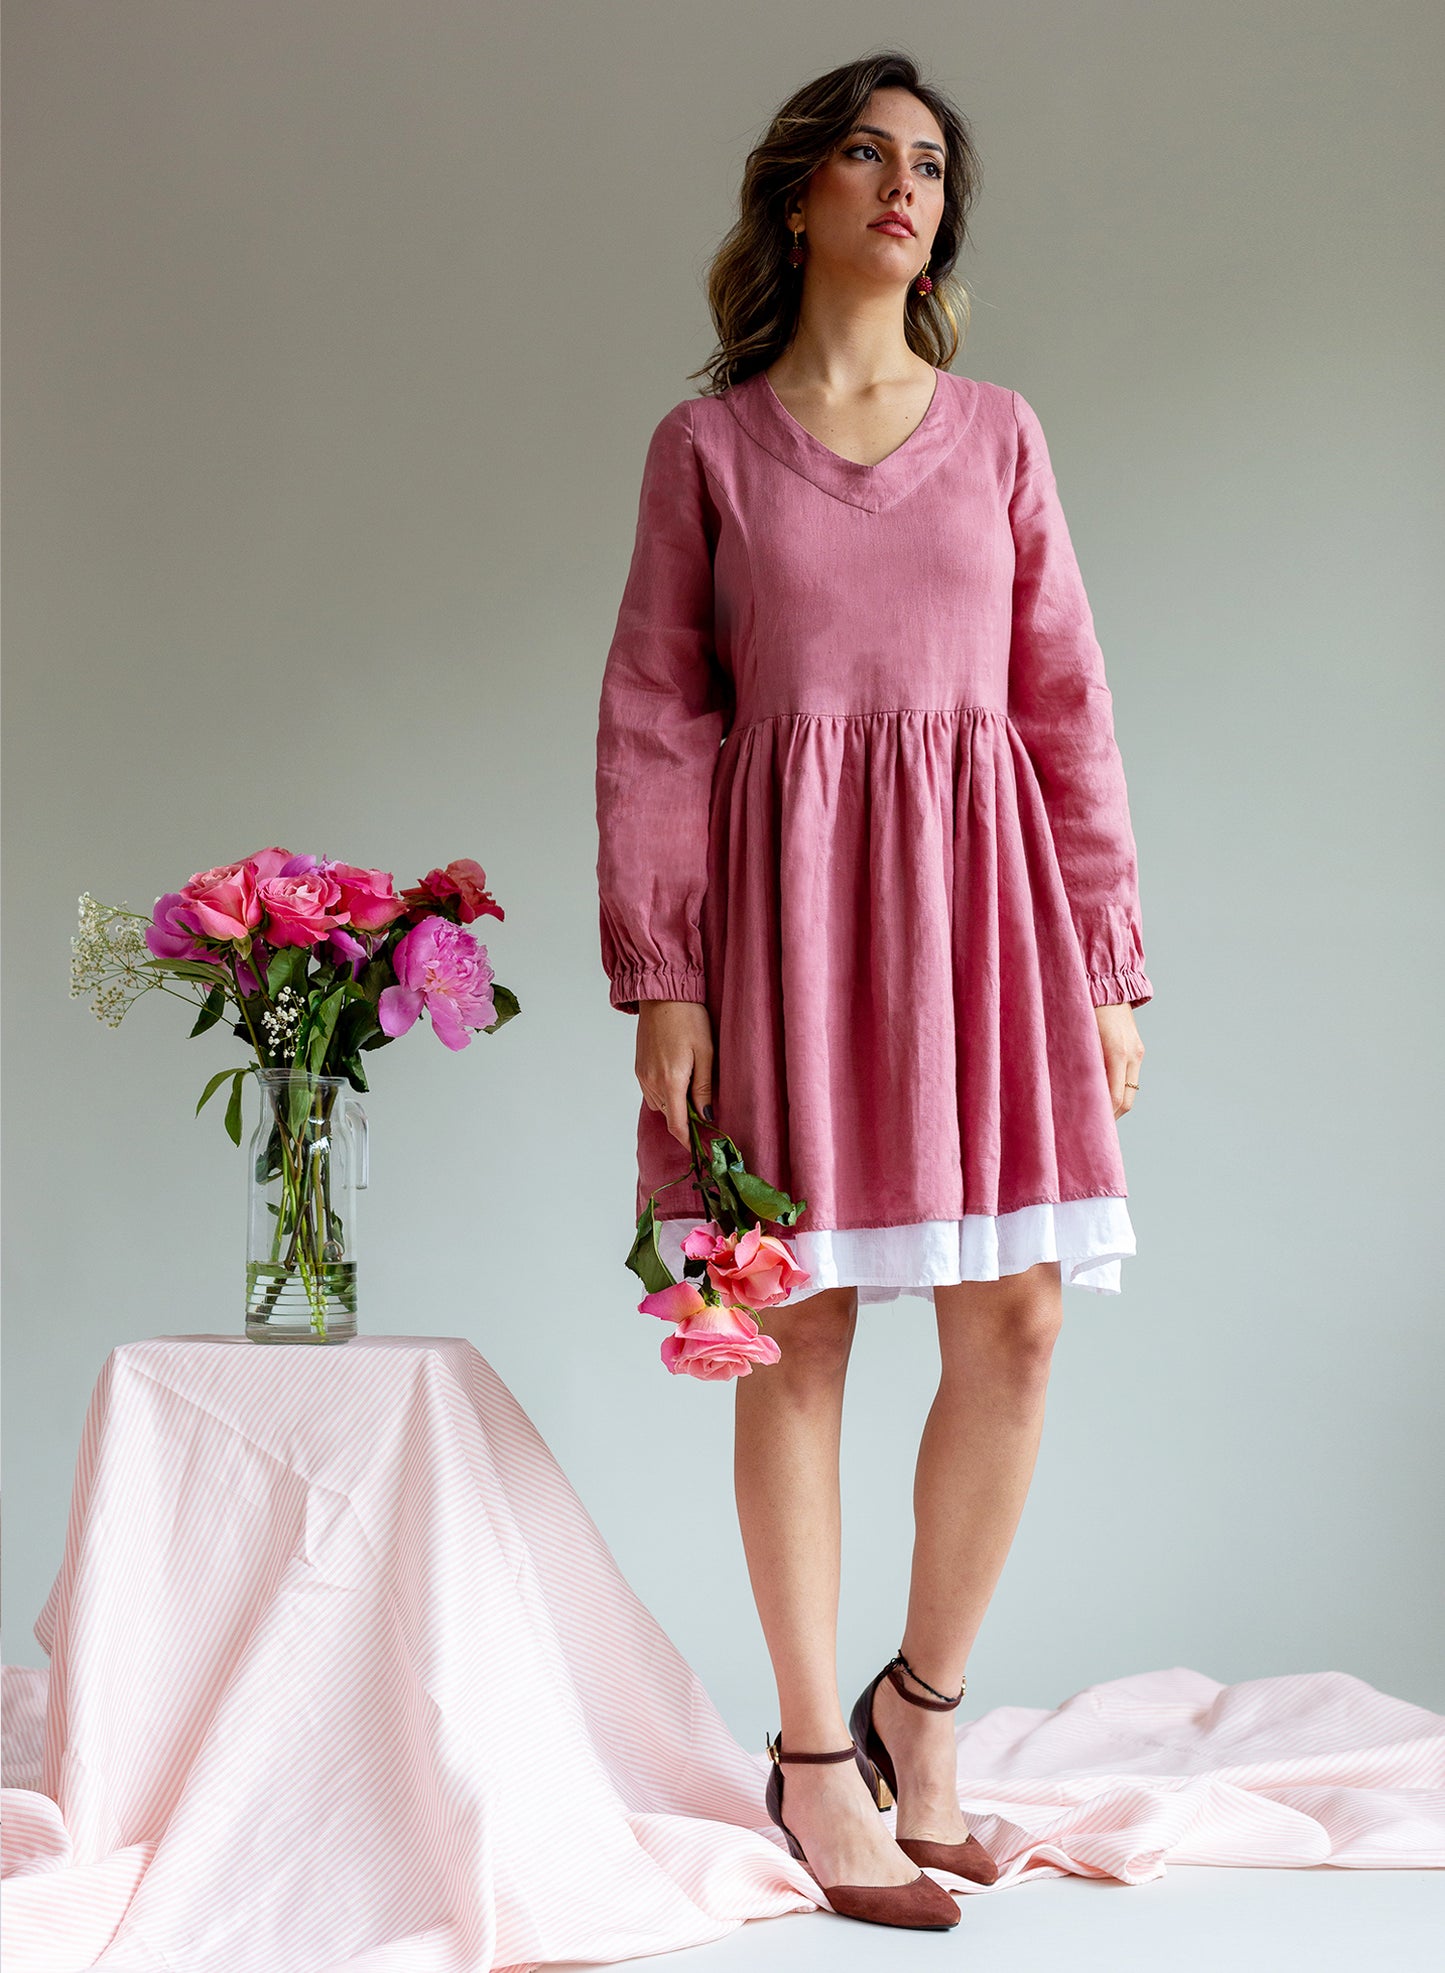 Woman wearing a V-neck short skater dress in a burnt soft pink colour with a white hem trim holding pink roses